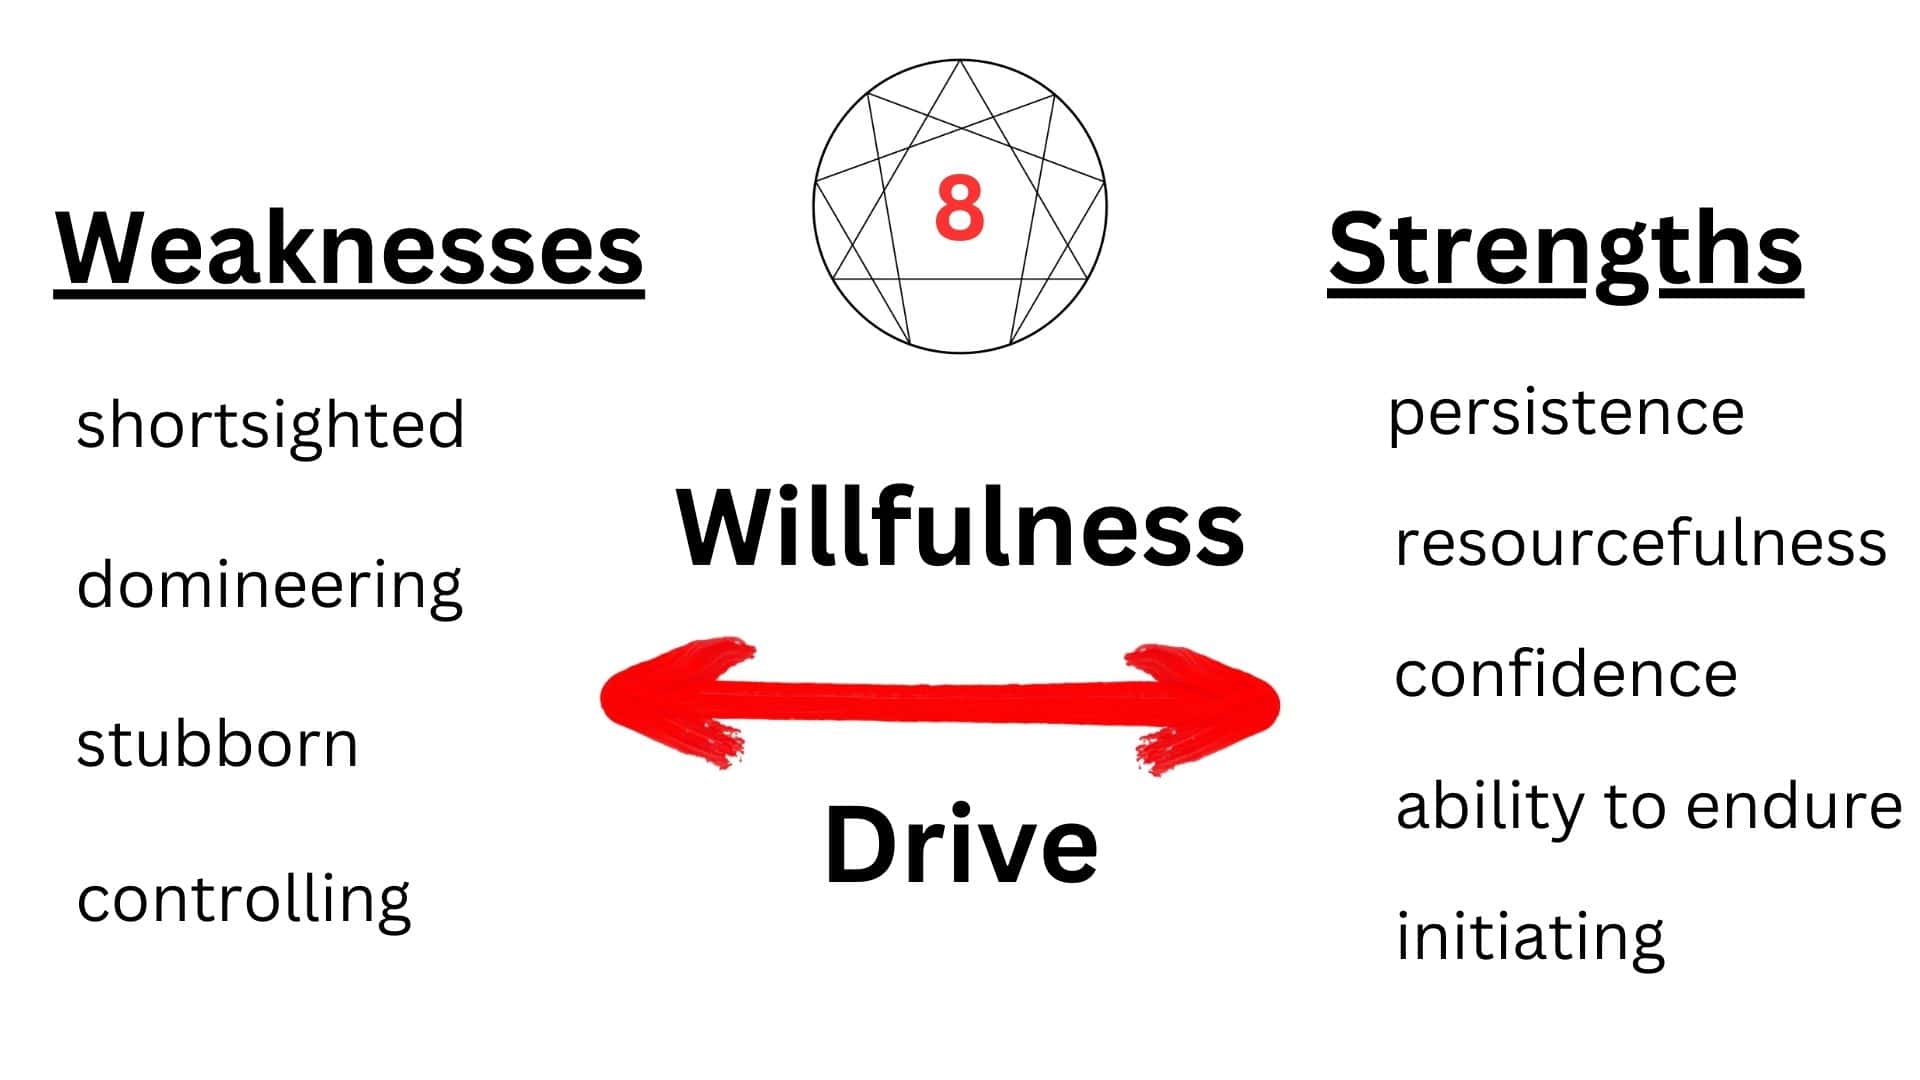 Enneagram 8 Strengths and Weaknesses: Willfulness, Drive